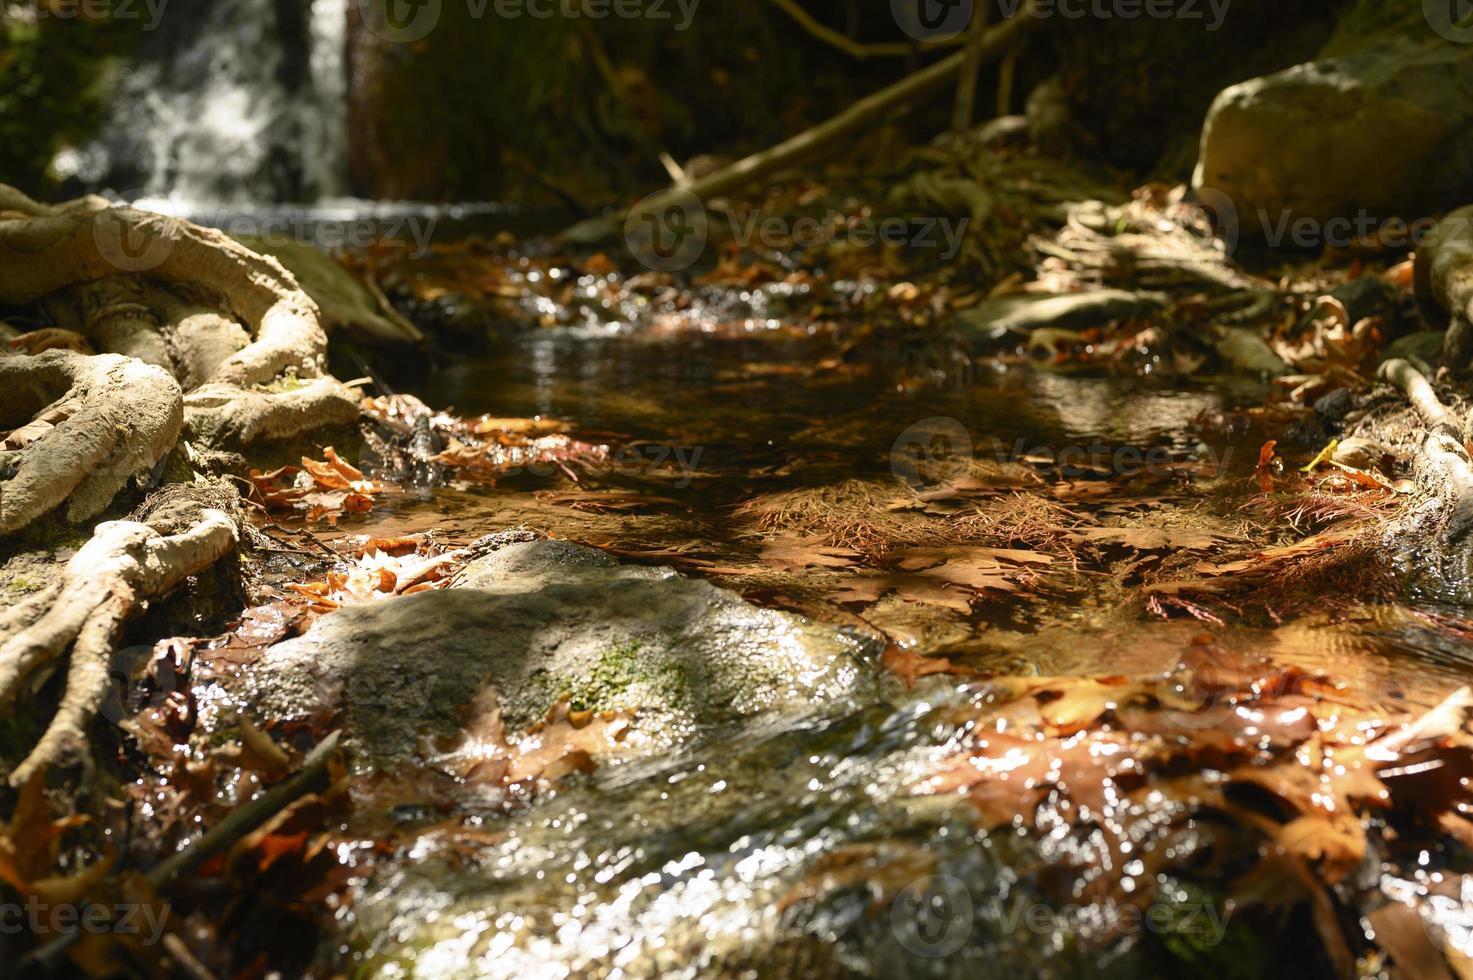 A stream running through the bare roots of trees in a rocky cliff and fallen autumn leaves photo